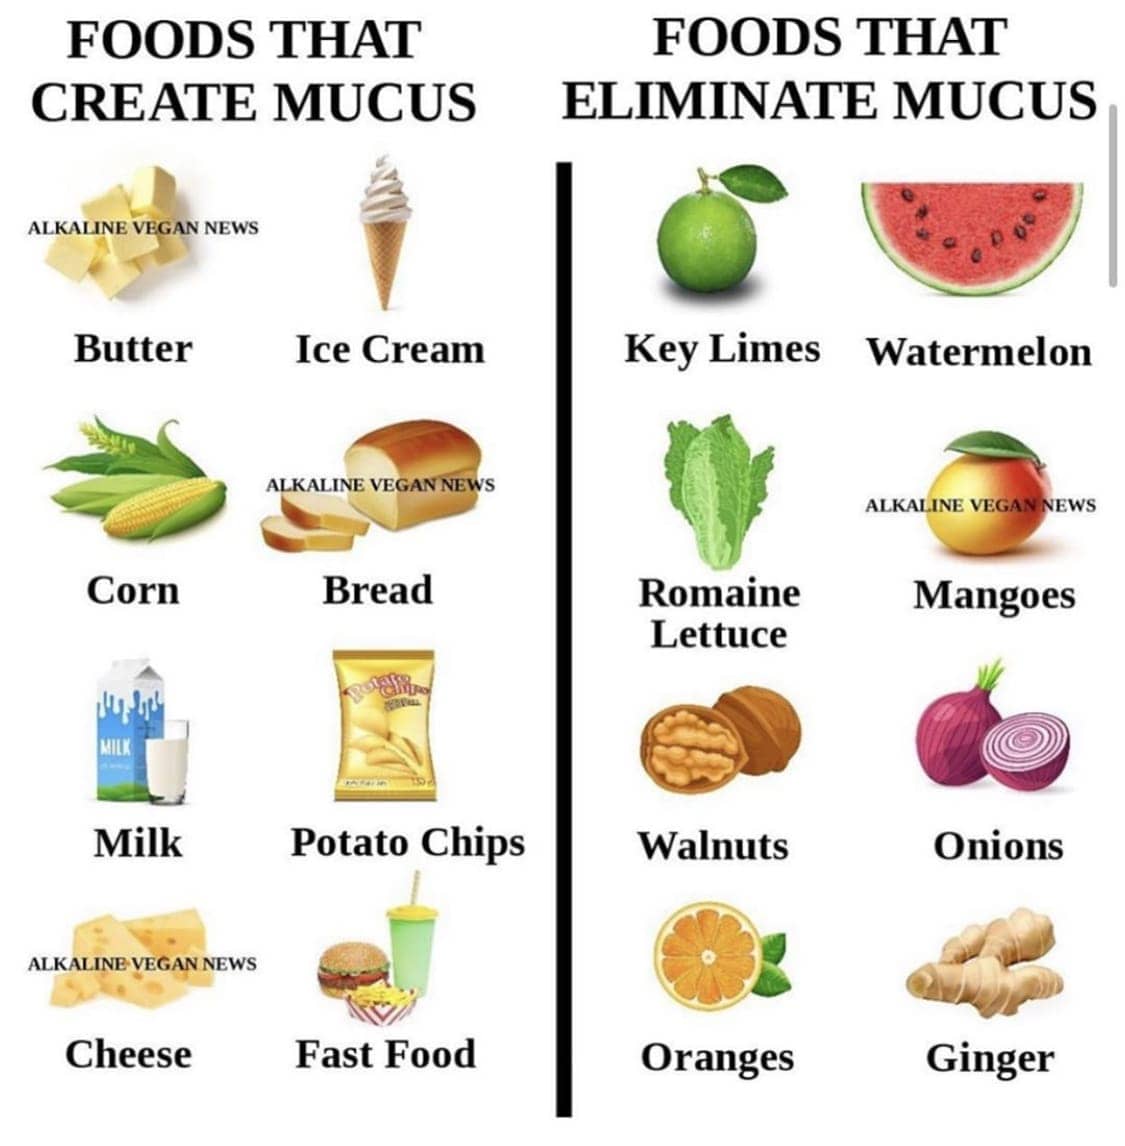 ‘Foods-that-create-eliminate-mucus’-graphic, TheJuiceMasters.com’s Will Gordon III: Battling COVID-19 on the frontline with fresh juice, Culture Currents 